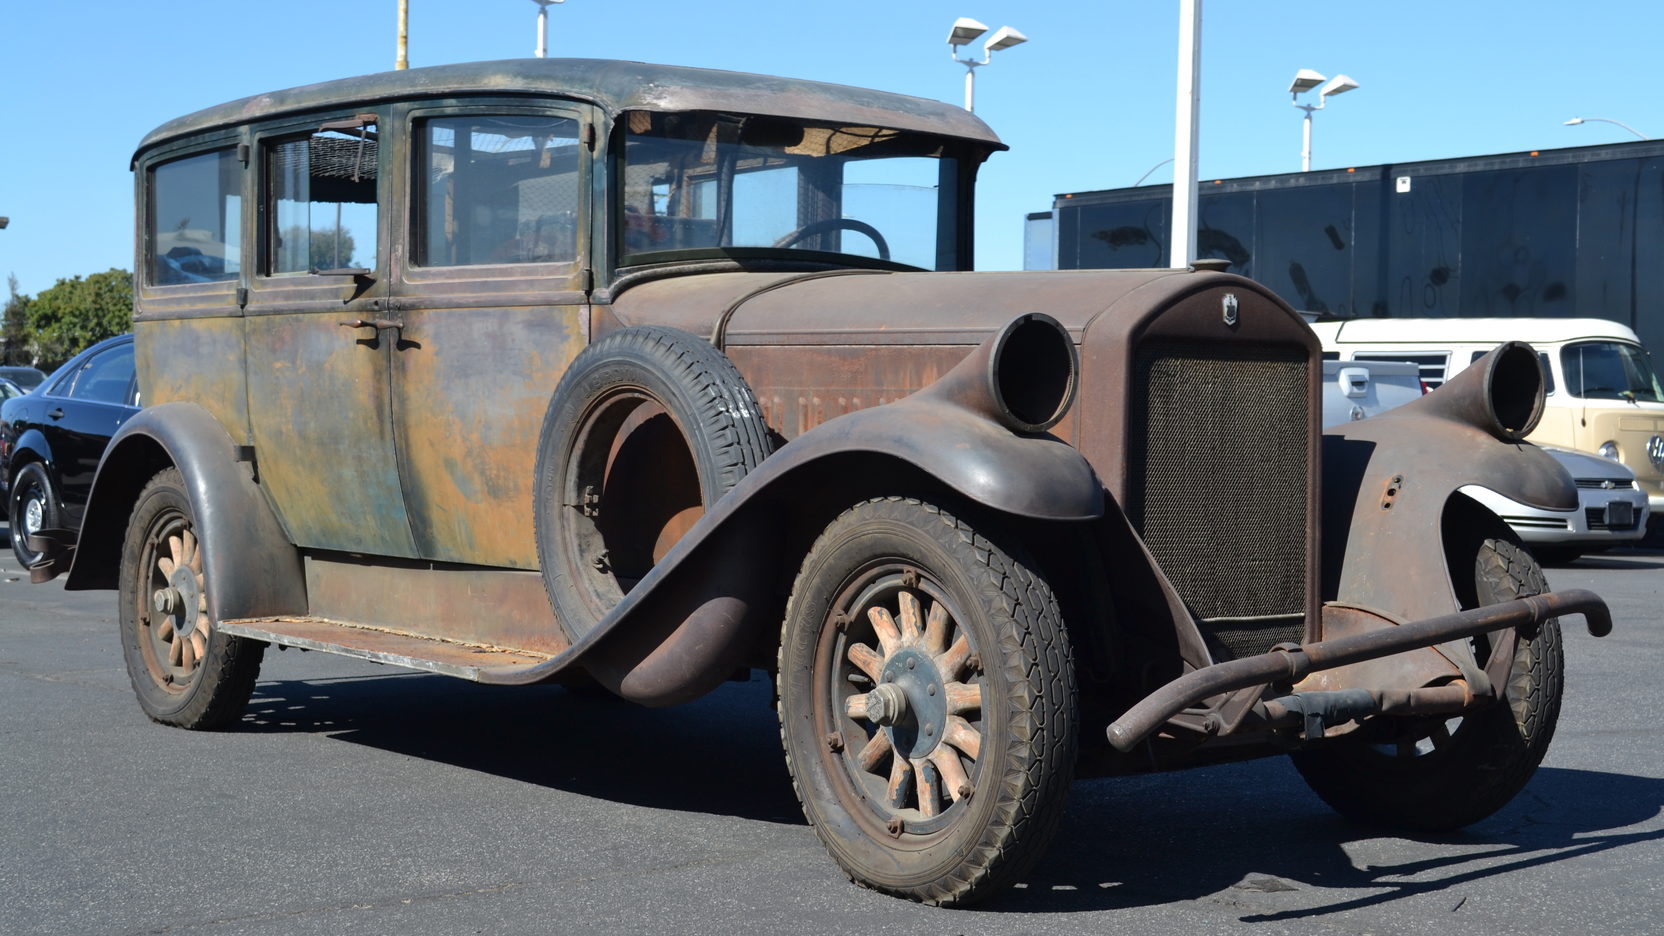 The 1928 Series 81 front bumper is spring loaded and is one of few signs of damage on this car.